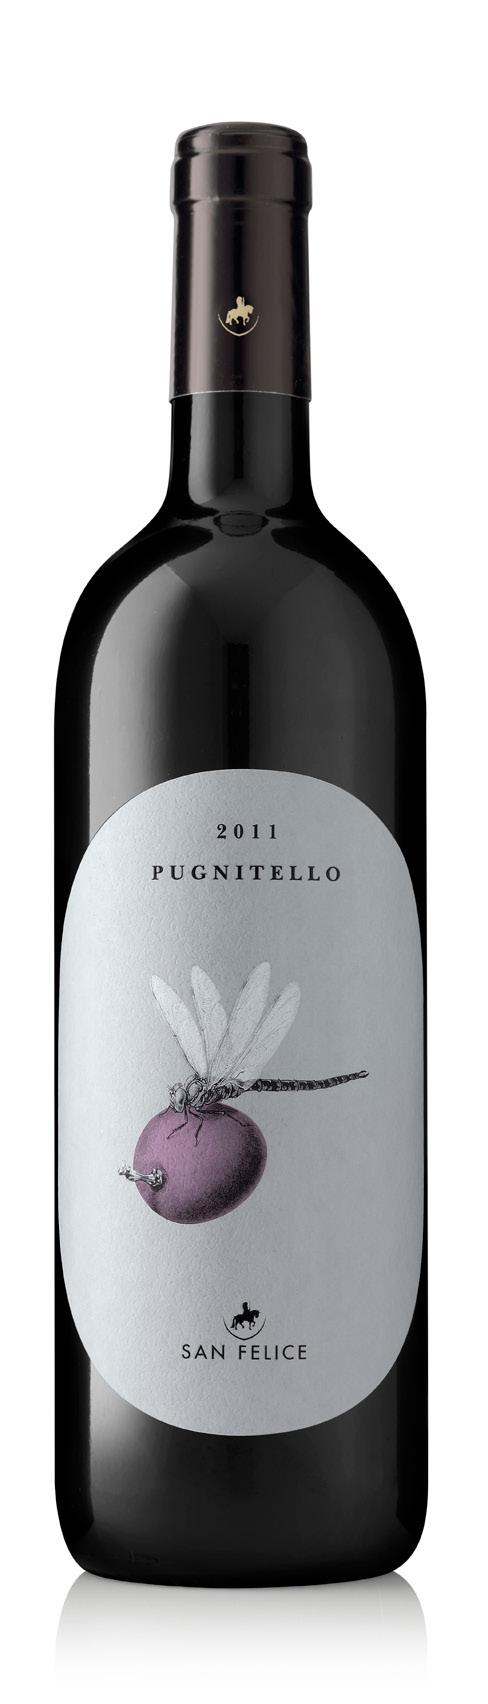 SAN FELICE RED WINES BACK TO MENU Pugnitello 2013 glass 14 bottle 62 Pugnitello 100% A dense purplish hue, with a remarkably rich nose, offering cinnamon, clove, wild fruit preserves, and tobacco